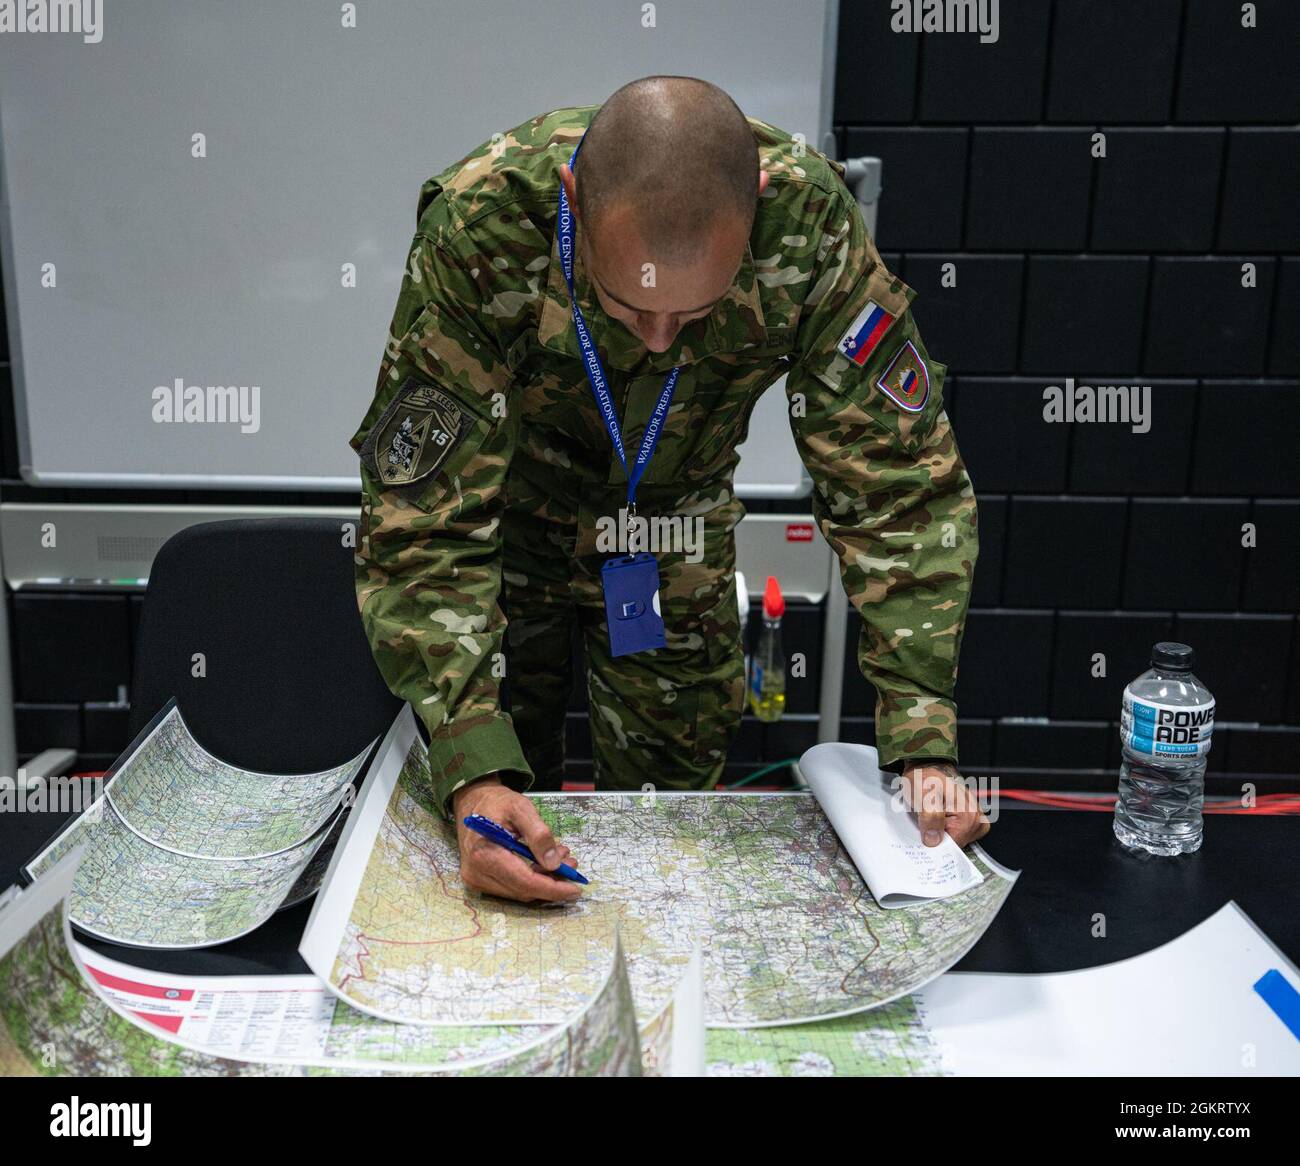 Sergeant 1st Class Almir Mujcinovic, a Joint Terminal Attack Controller with the Slovenian Army’s 152nd Fixed Wing Squadron, annotates locations on a scenario map while attending a 4th Combat Training Squadron course at the U.S. Air Forces in Europe and Air Forces Africa’s Warfare Center on Einsiedlerhof Air Station, Germany, June 23, 2021. “These courses will continue to provide opportunities to improve interoperability between nations,” Mujcinovic said.  The 4th CTS has a multinational team of NATO JTACs with a wide range of experience developing advanced instructor and evaluator courses, a Stock Photo